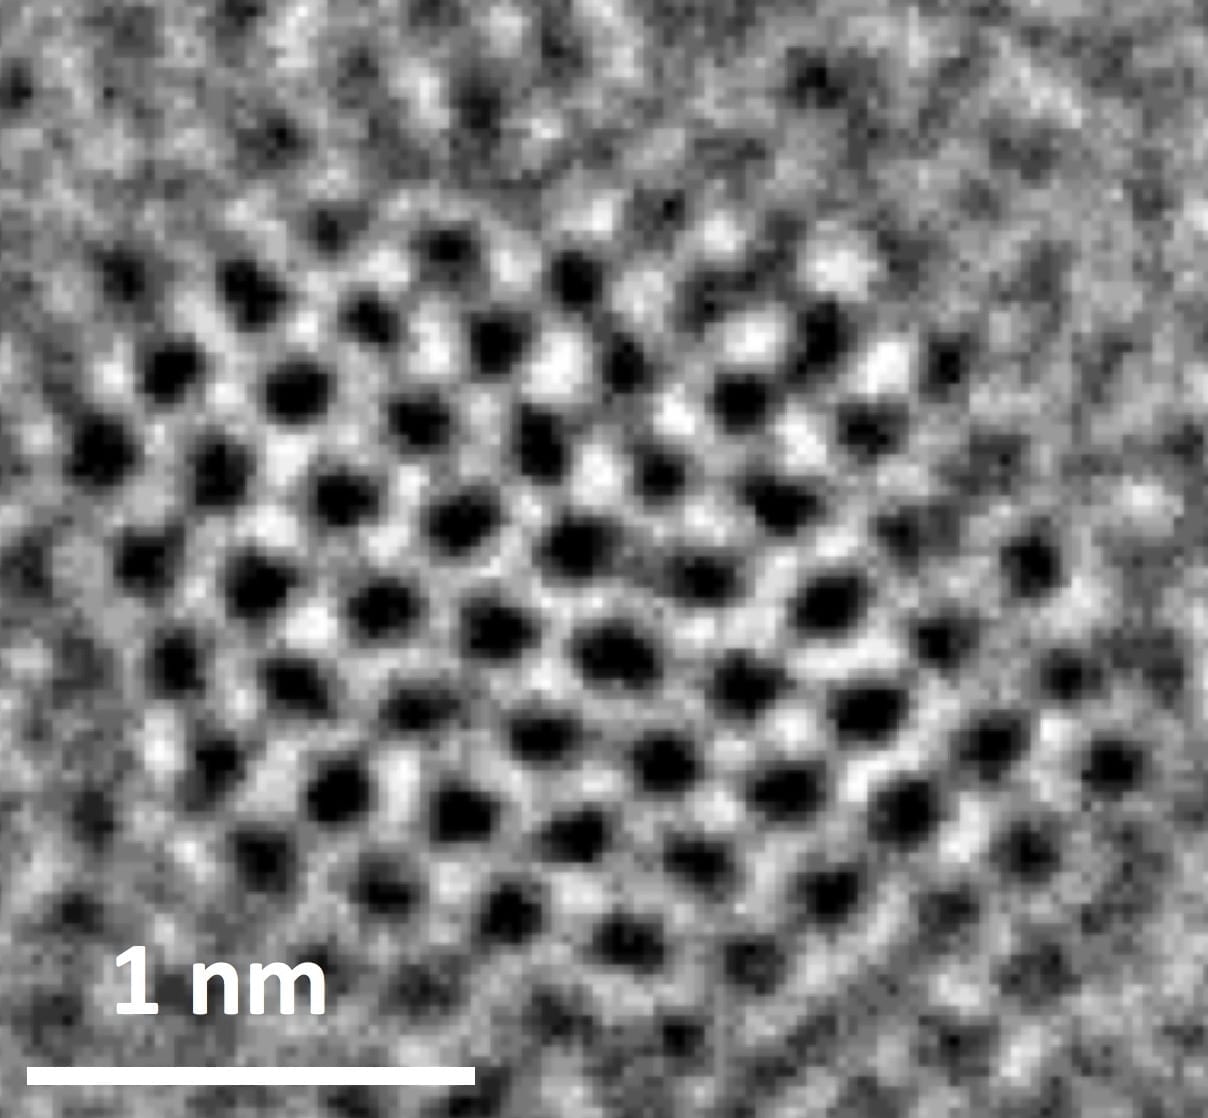 Graphene quantum dots can recycle waste carbon dioxide into valuable fuel